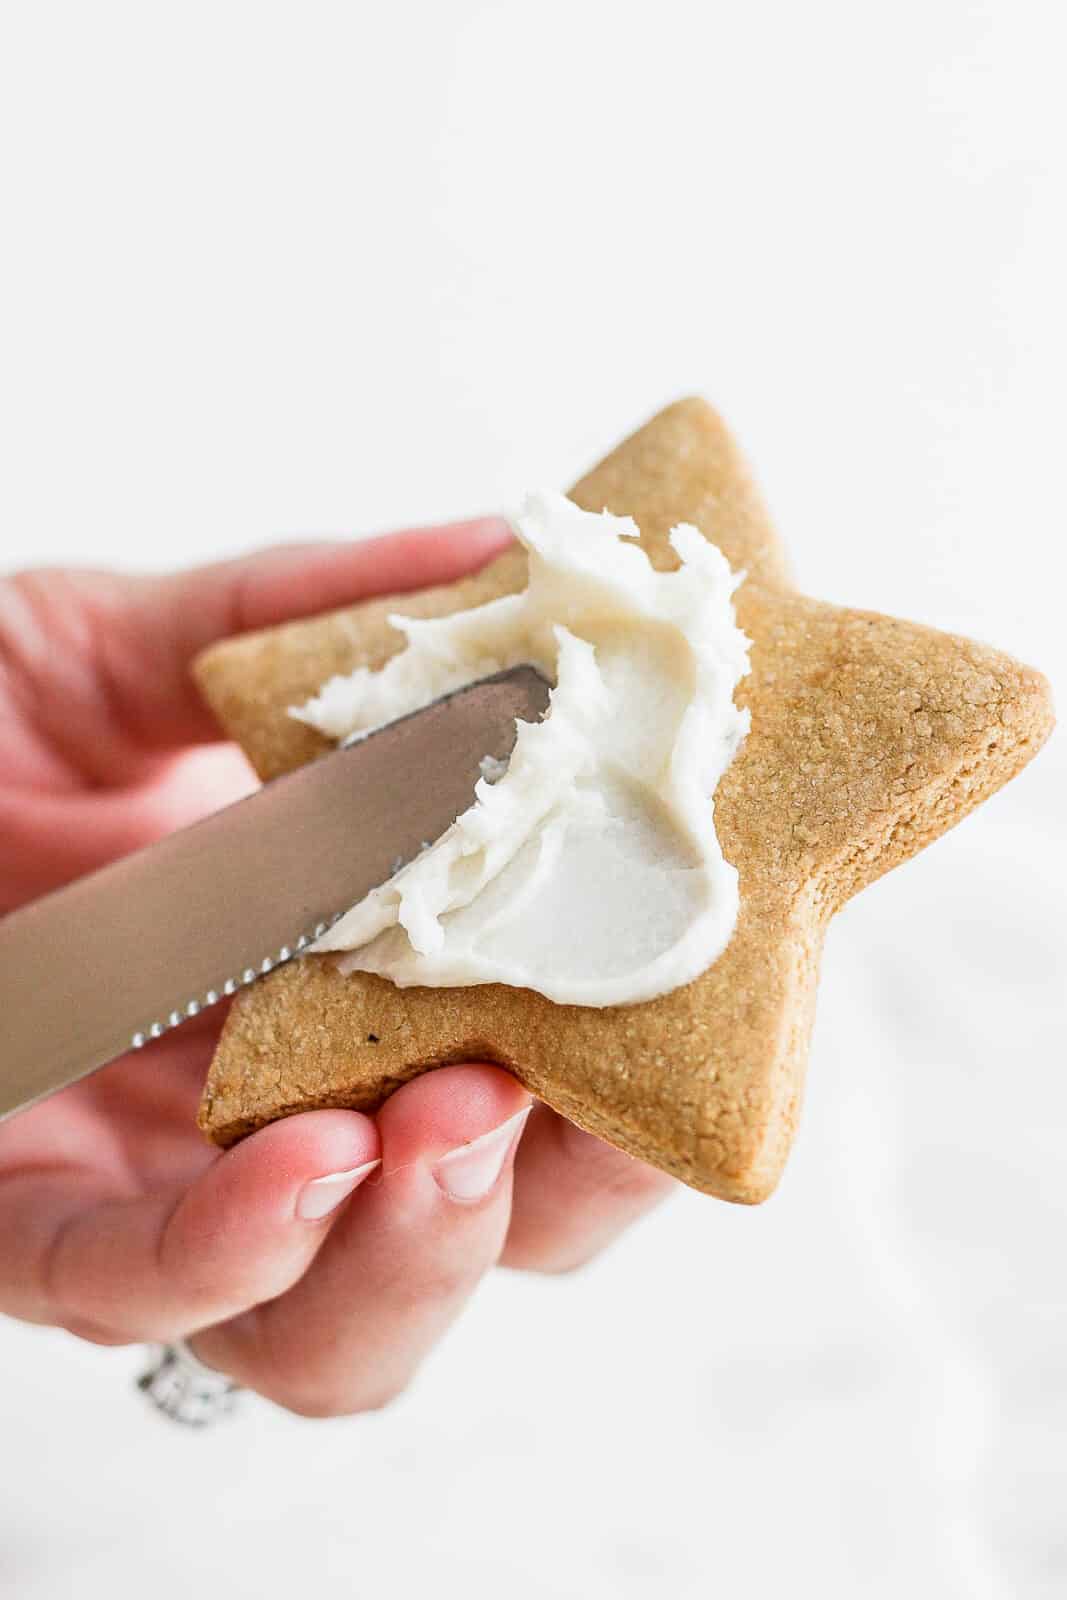 Using a knife to spread dairy free frosting on a cut-out cookie.